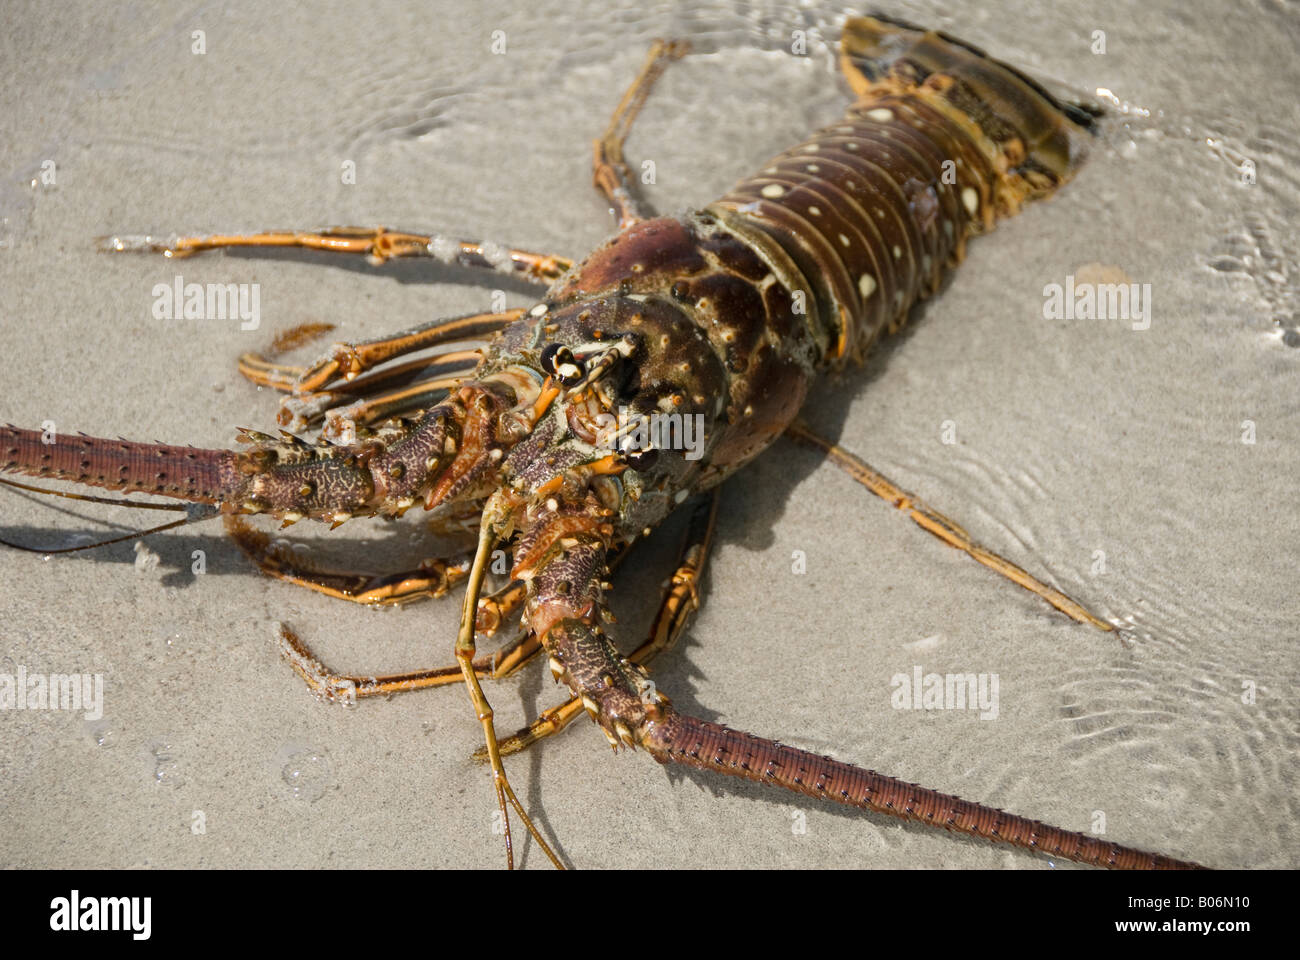 lobster close view Stock Photo